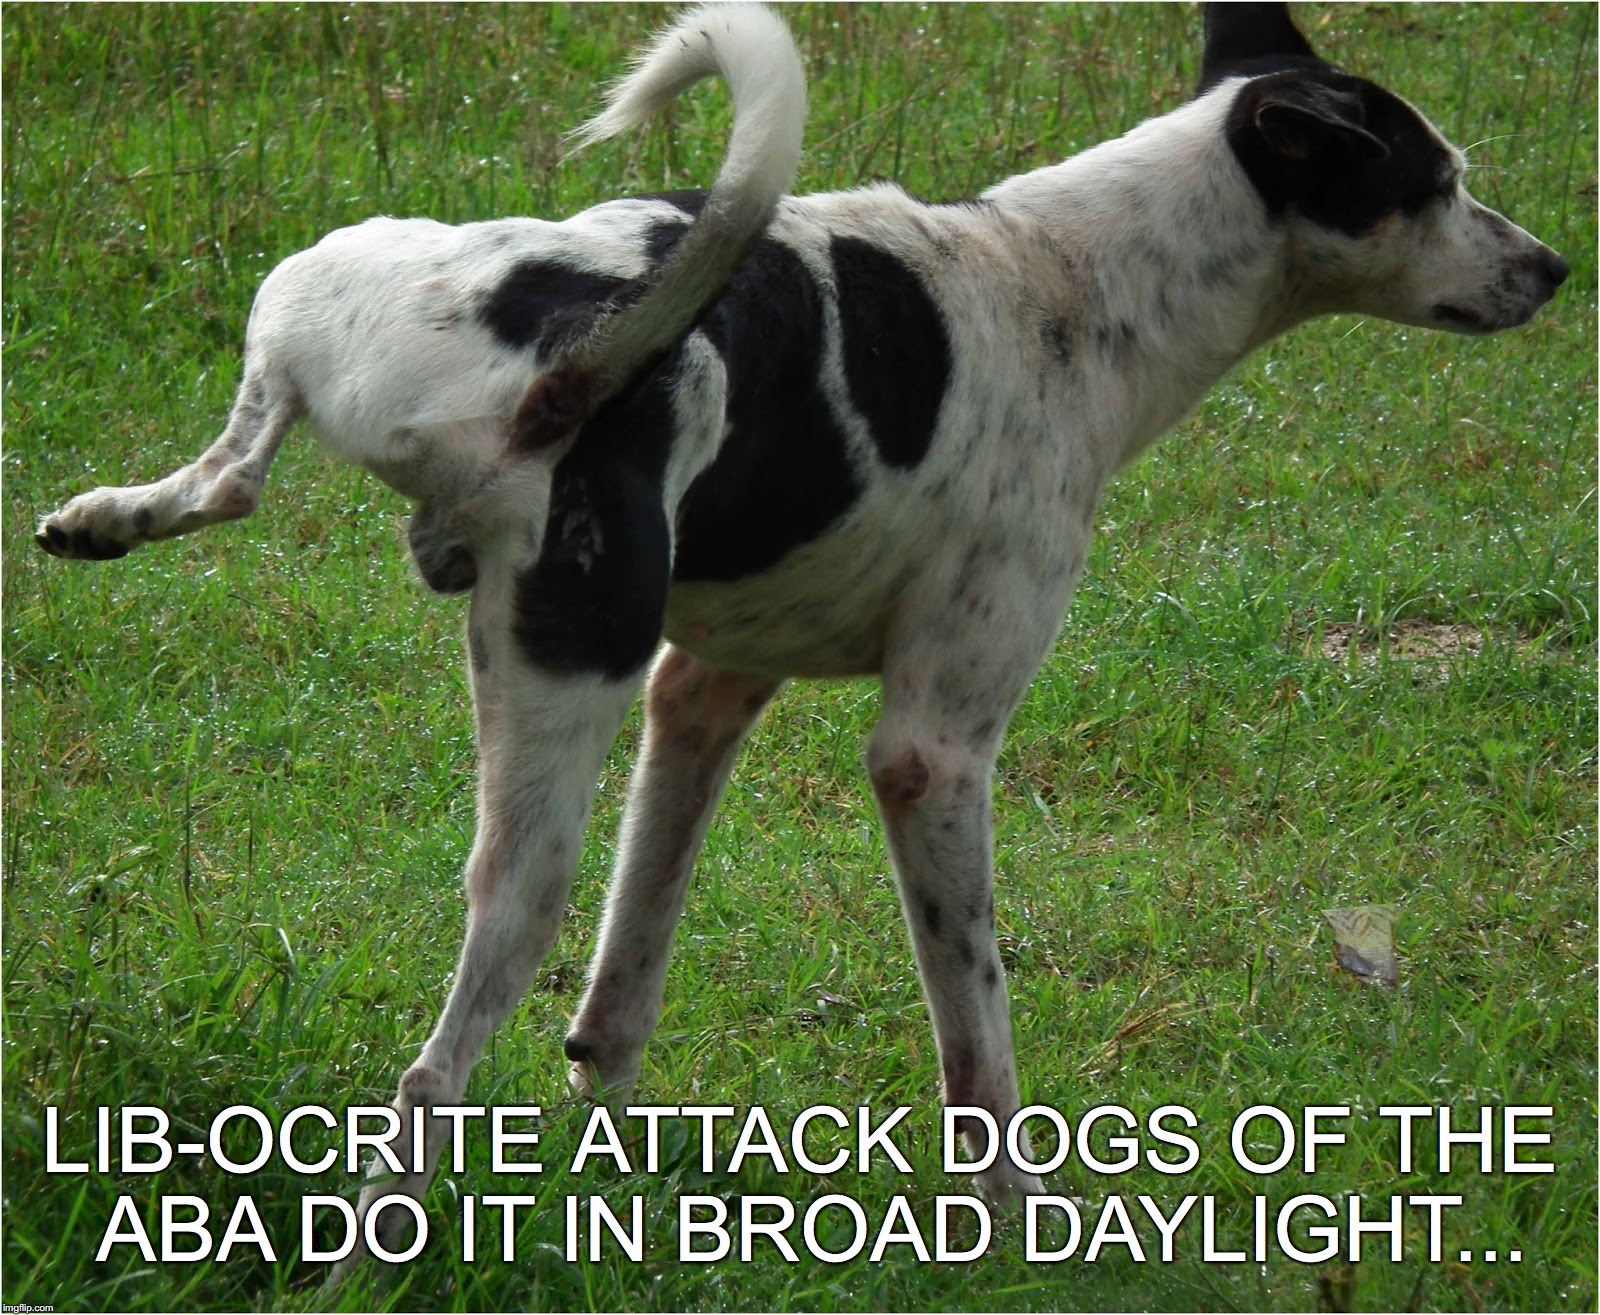 LIB-OCRITE ATTACK DOGS OF THE ABA DO IT IN BROAD DAYLIGHT... | image tagged in dog pee,aba,lib-ocrite | made w/ Imgflip meme maker